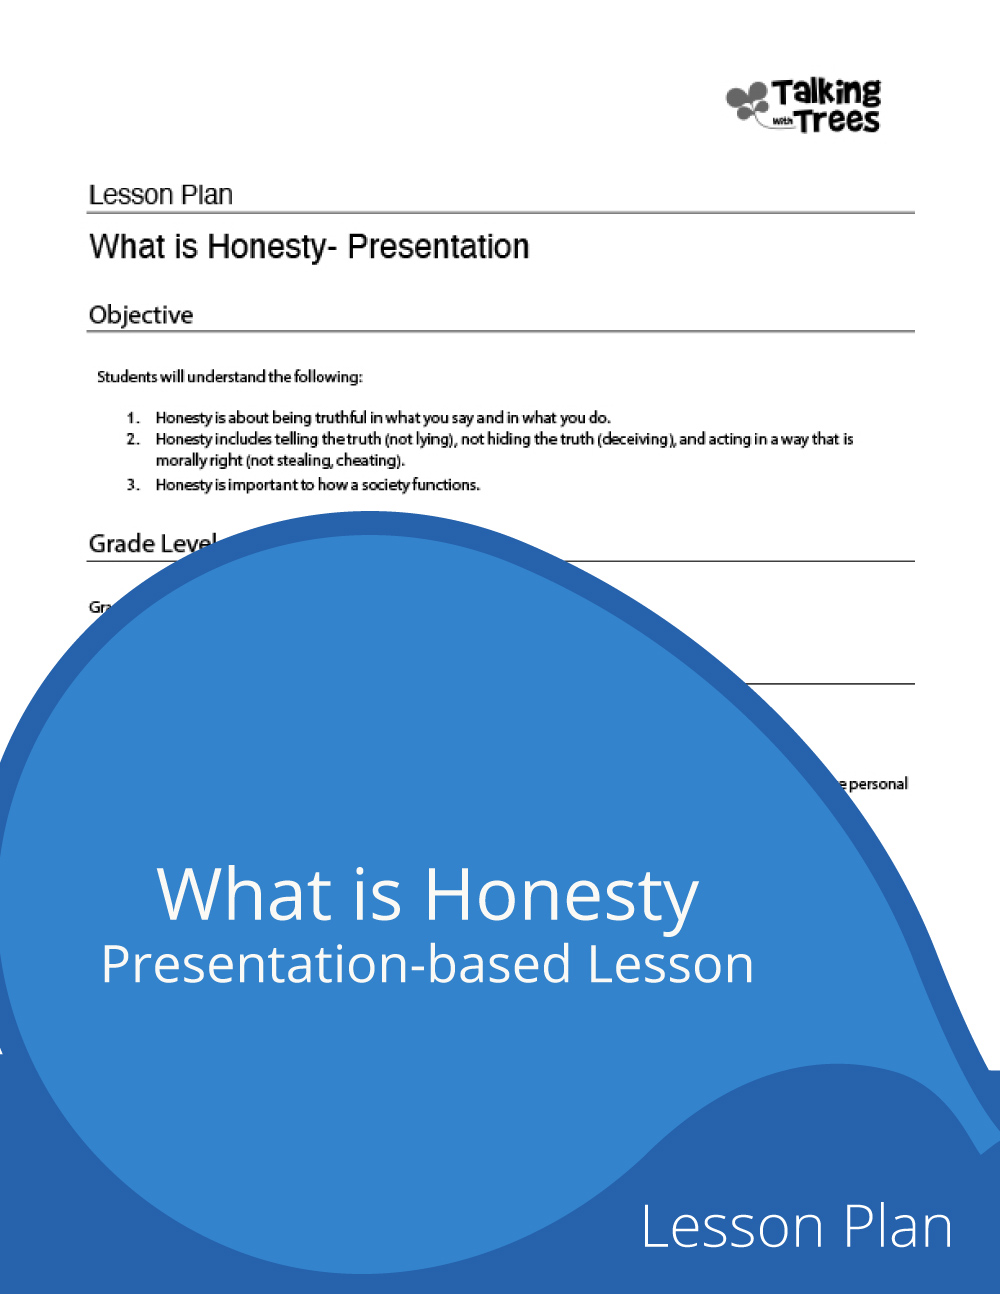 What is Honesty Lesson Plan - Presentation